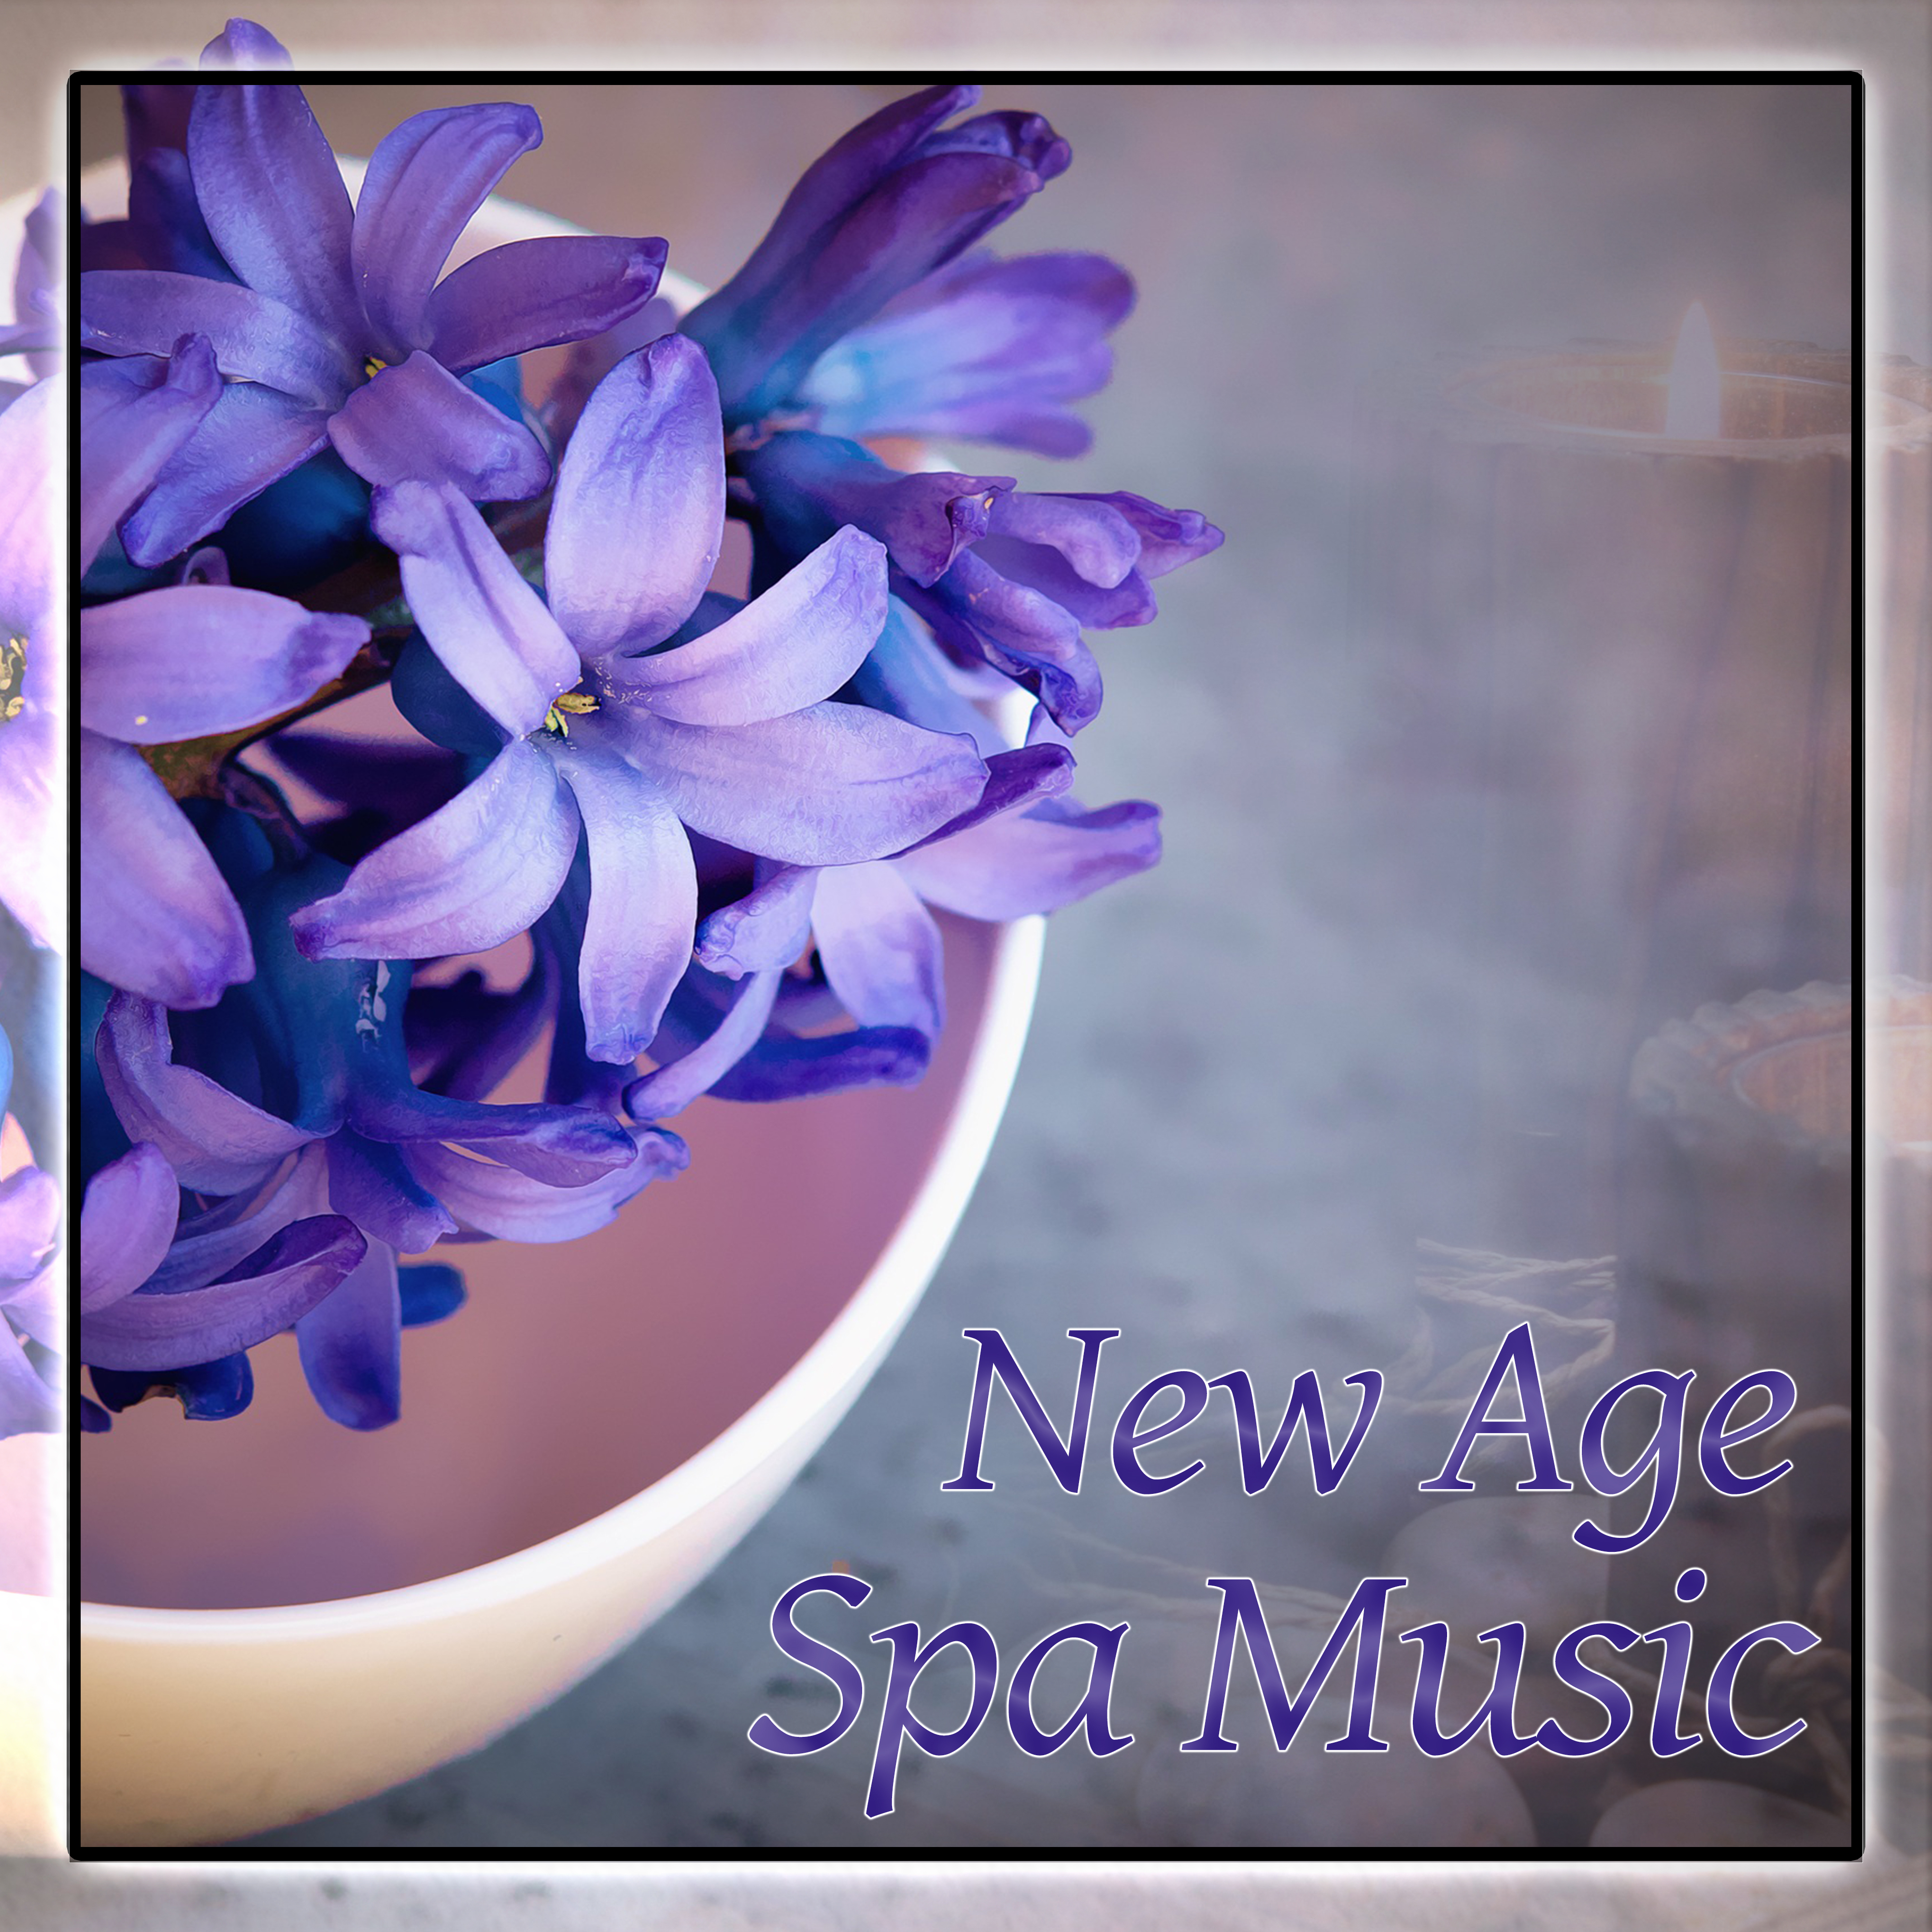 New Age Spa Music  Sensual Music for Home Spa, Deep Relaxing with Calming Sounds, Best to Massage Meditation, Nature Spa Music to Relieve Stress, Beautiful Moments